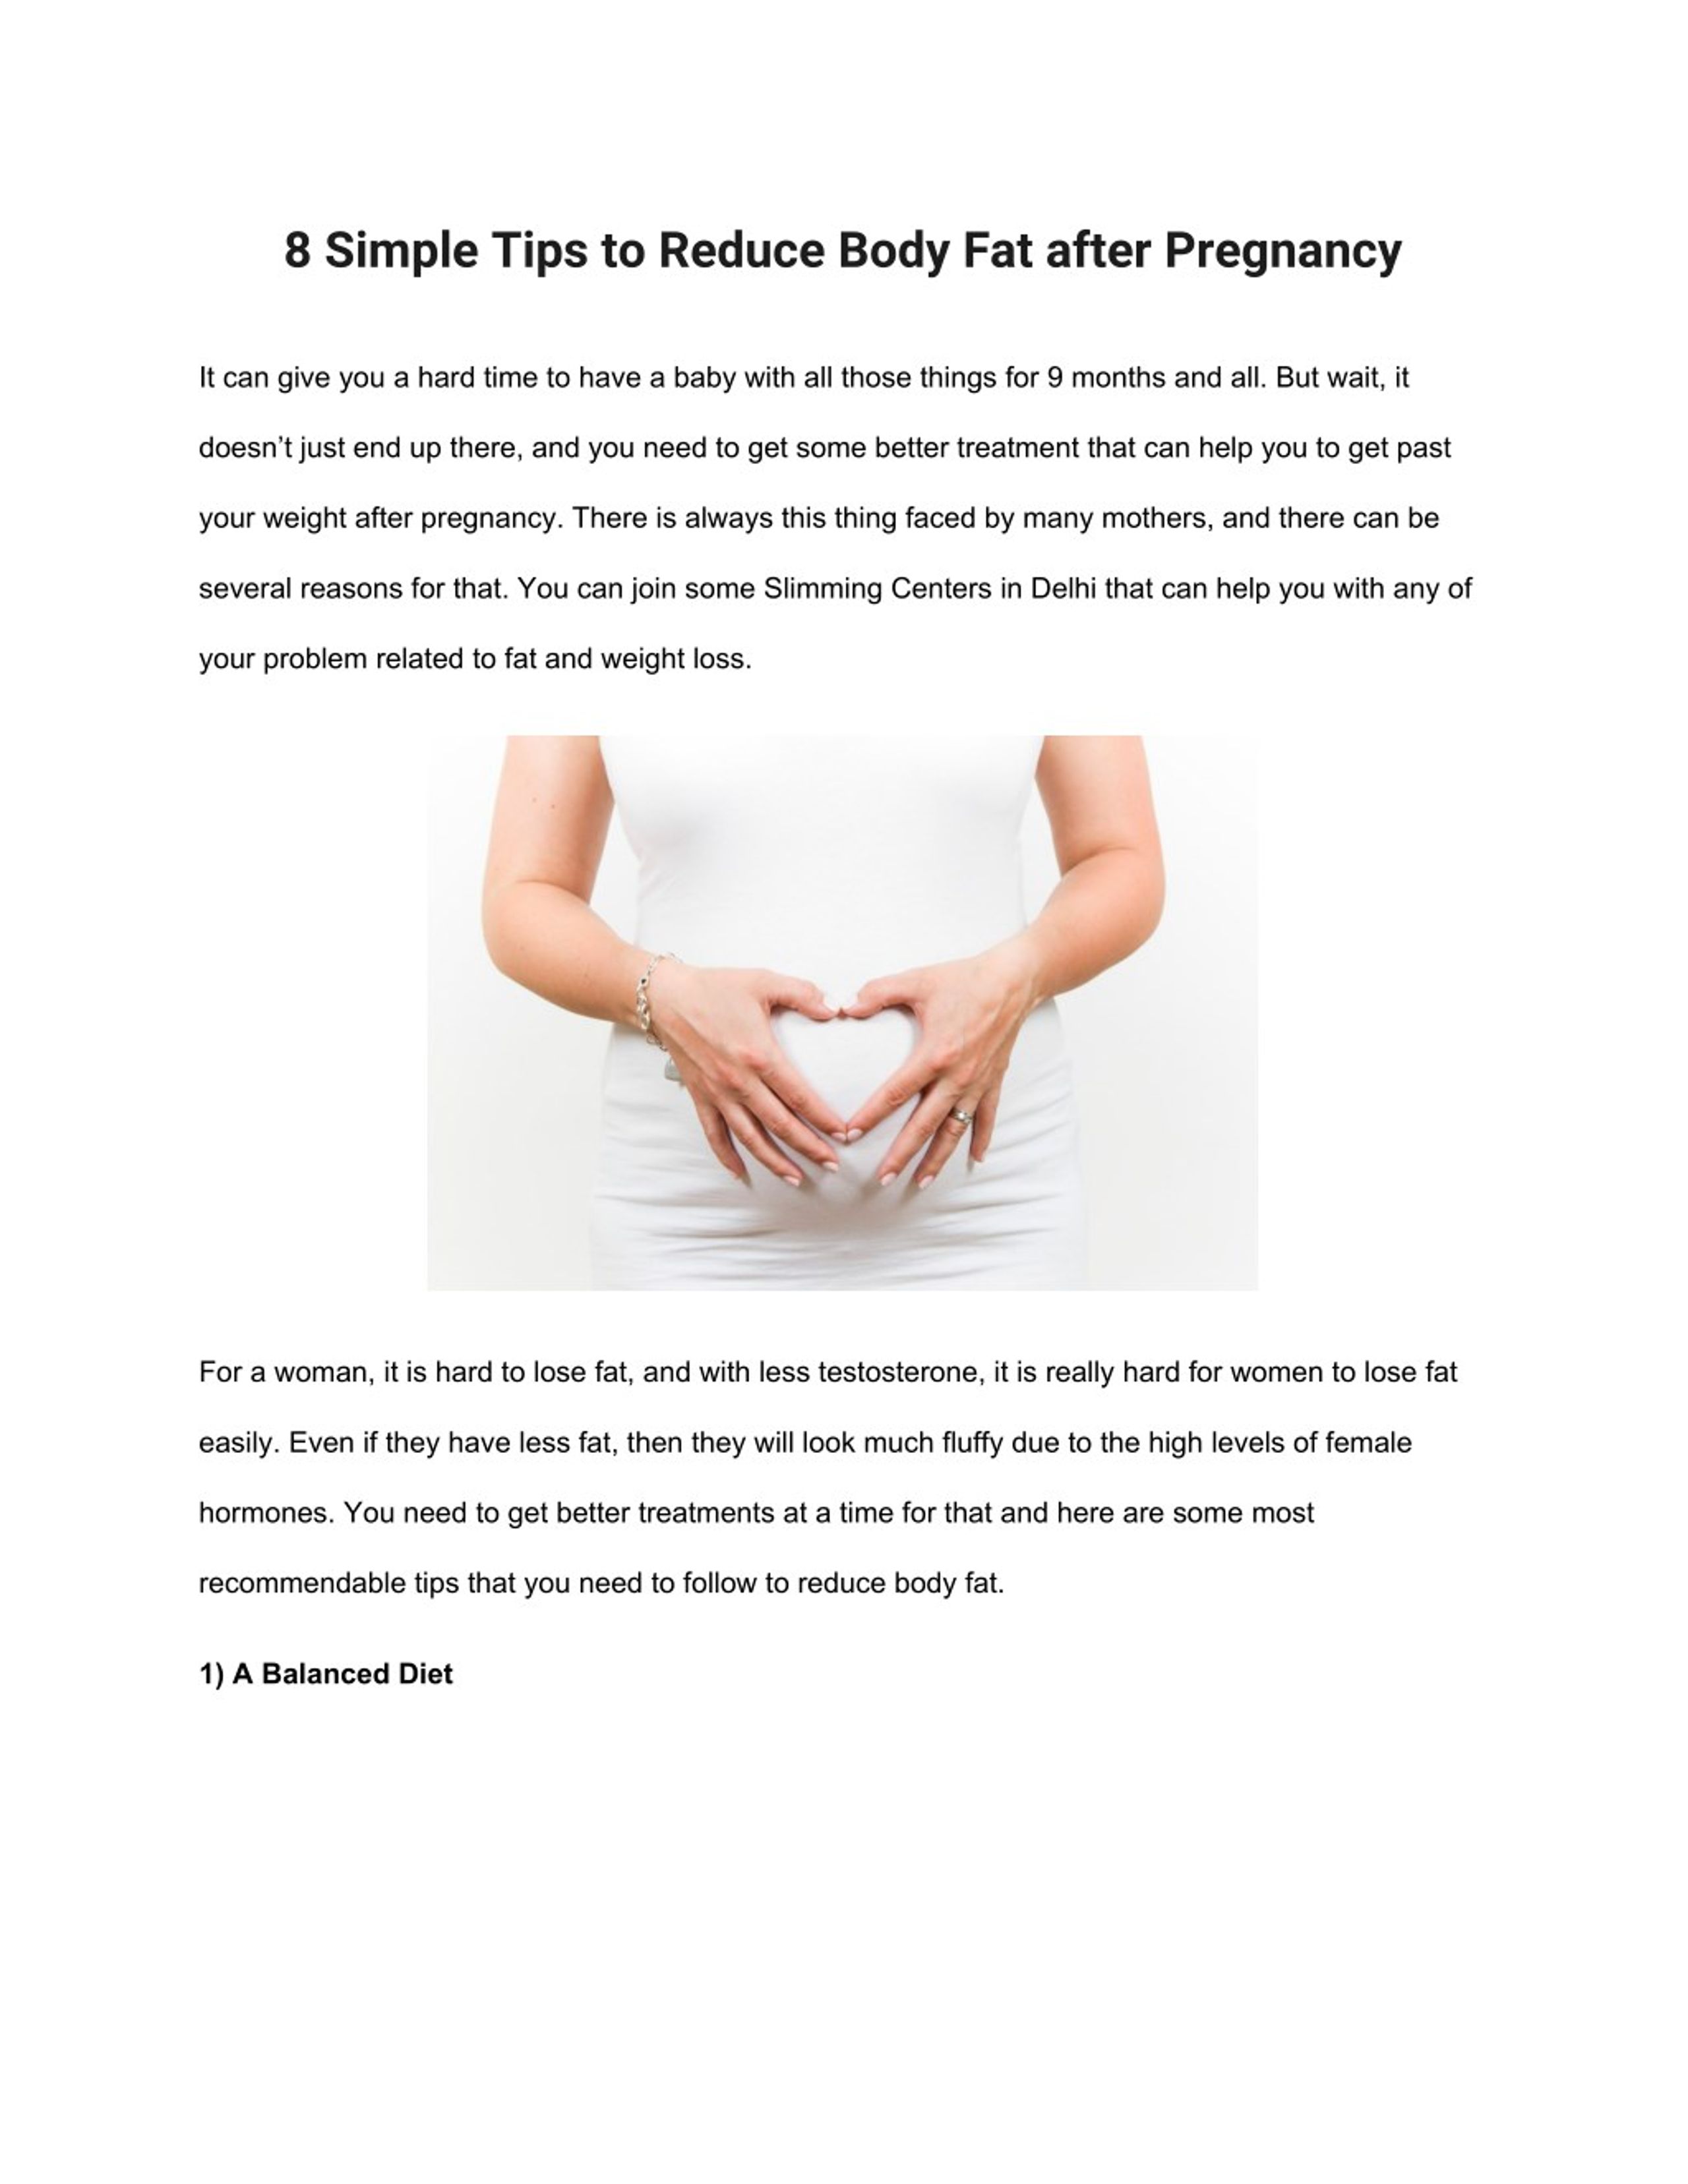 body fat after pregnancy